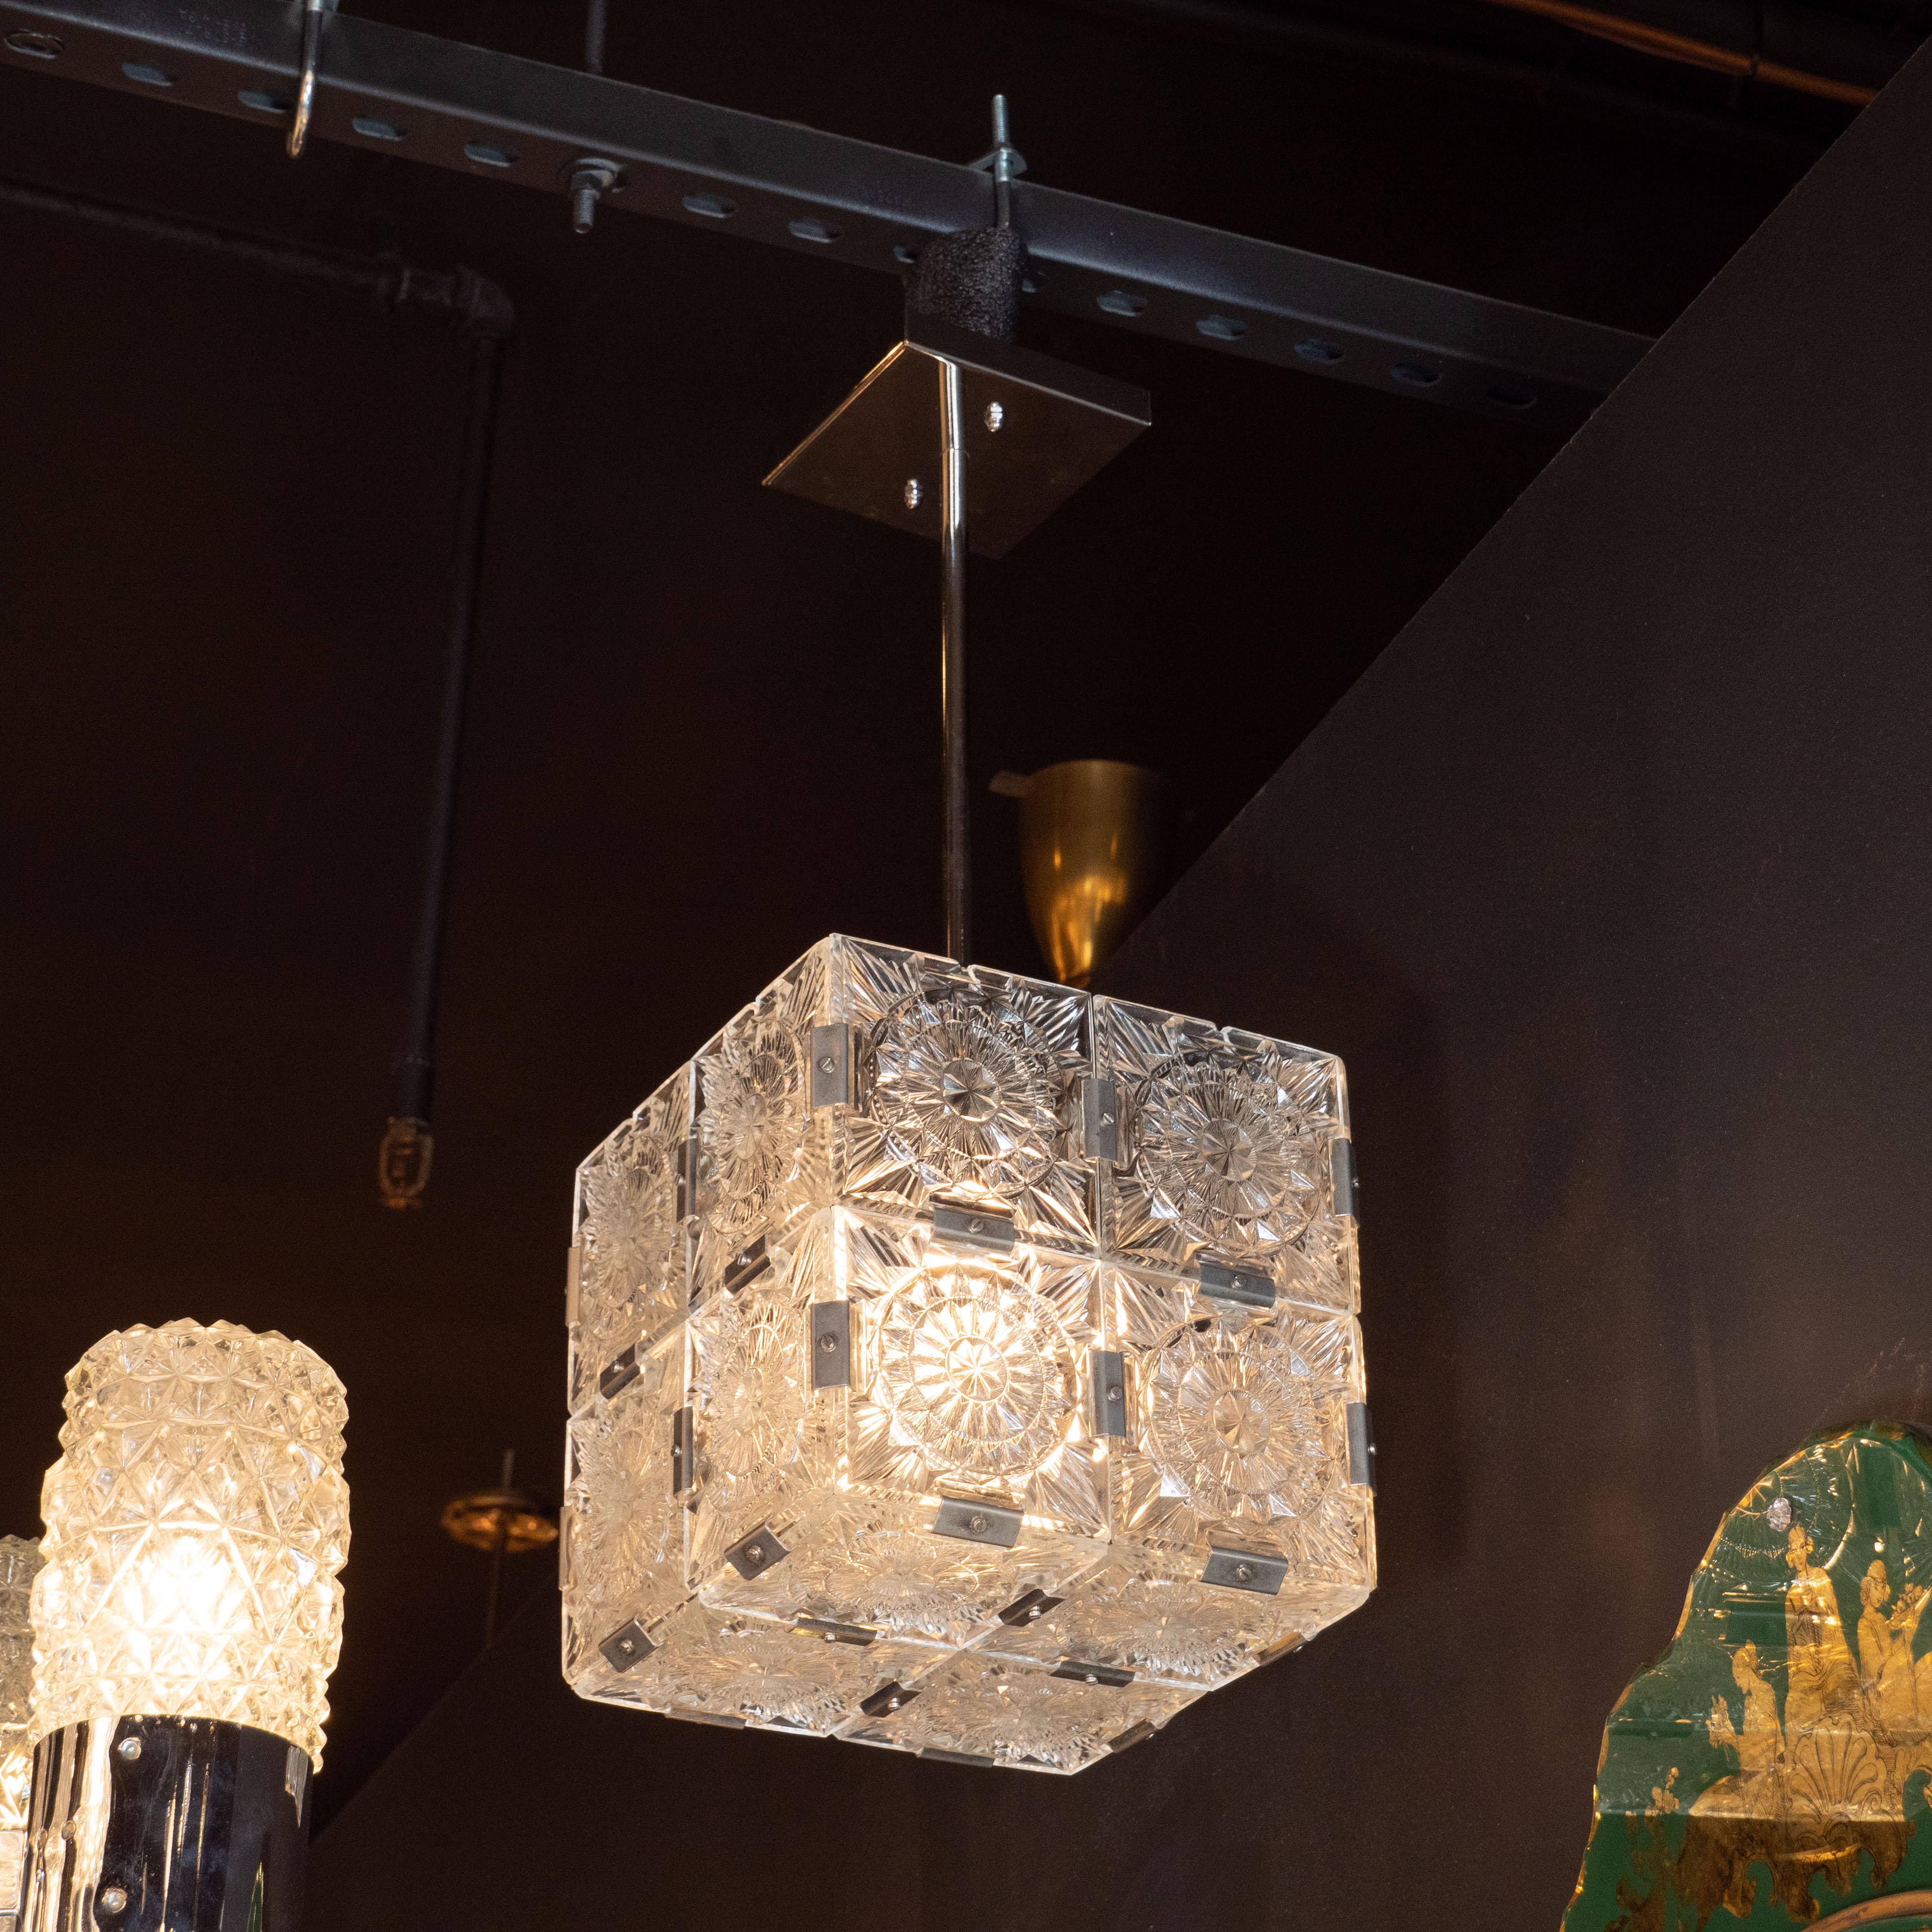 These elegant Mid-Century Modern cube pendants were produced circa 1950 by the renowned Austrian maker Kinkeldey. Each side features four glass panels etched with an elaborate starburst pattern resembling an abstracted and illuminated woodcut print